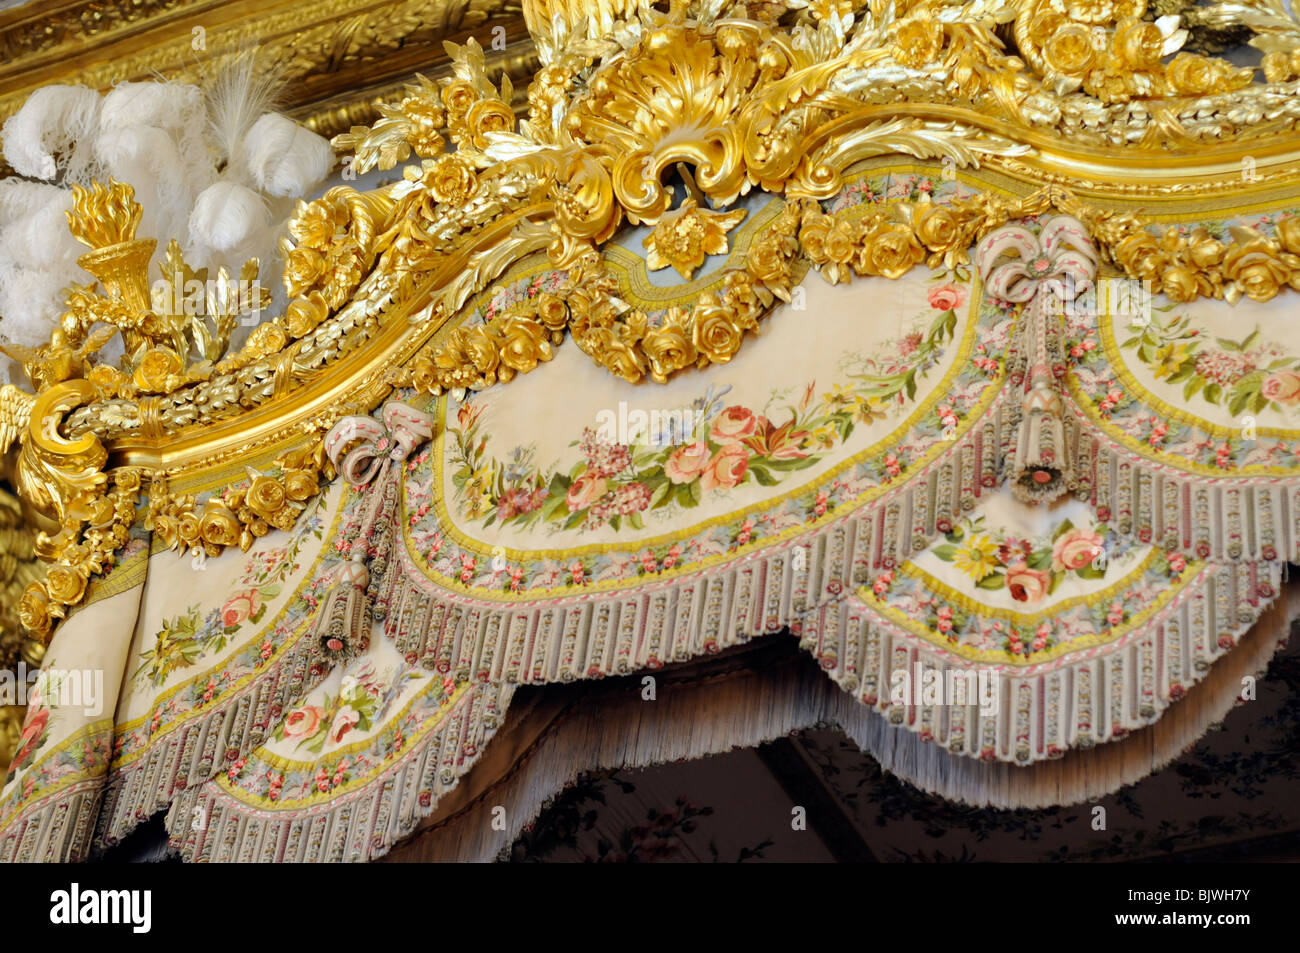 The canopy of Marie-Antoinette's bed, The Queen's Bedchamber, Palace of Versailles, Paris, France Stock Photo